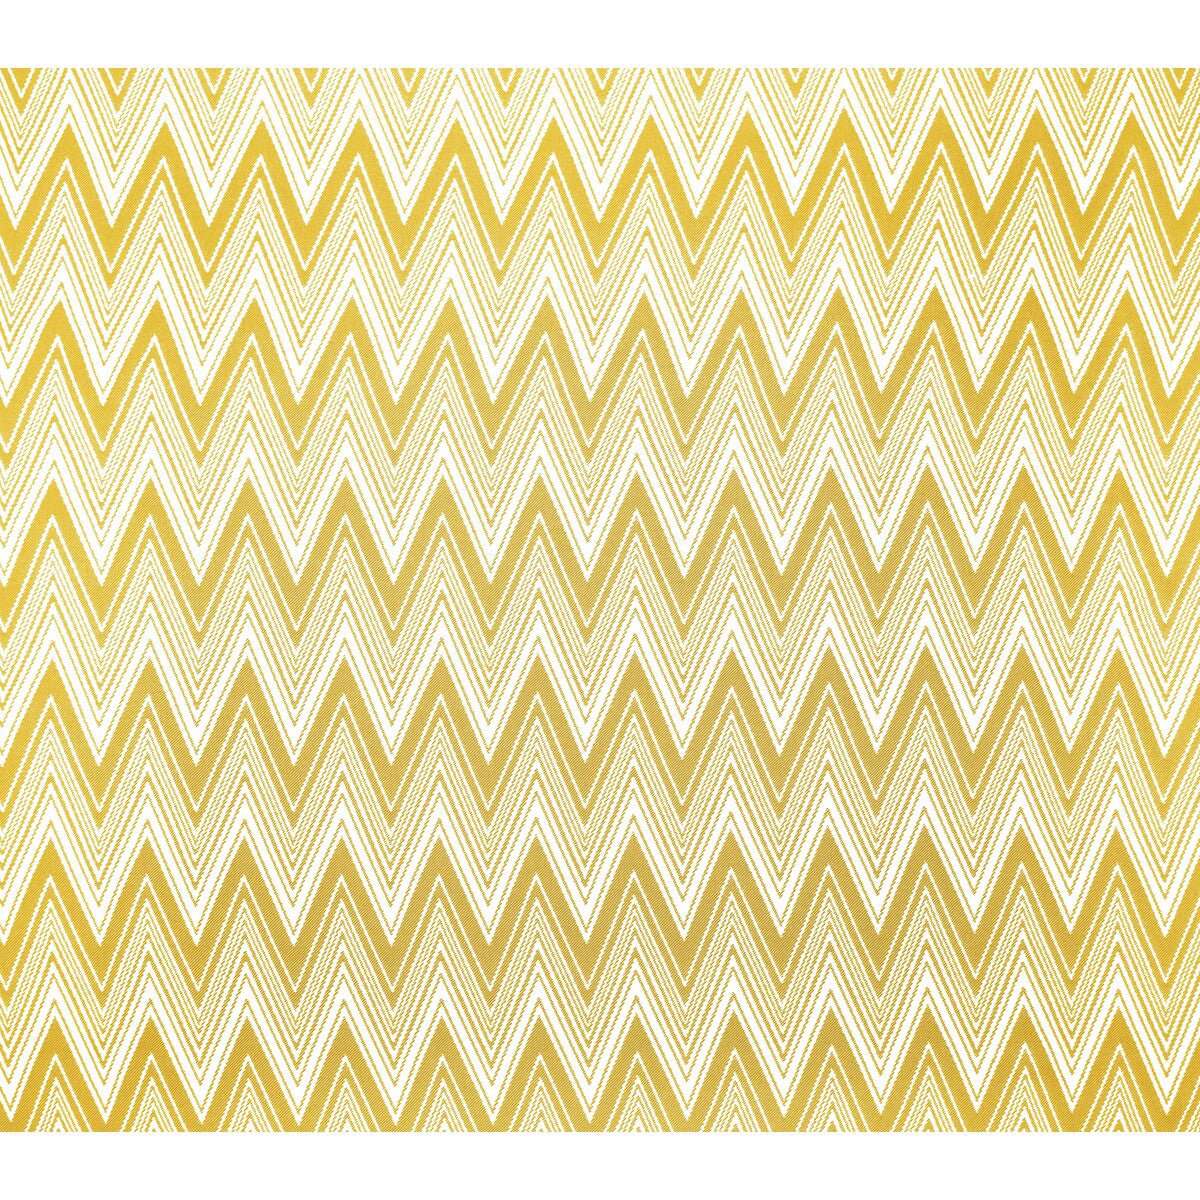 Grace fabric in amarillo color - pattern GDT5381.6.0 - by Gaston y Daniela in the Gaston Africalia collection